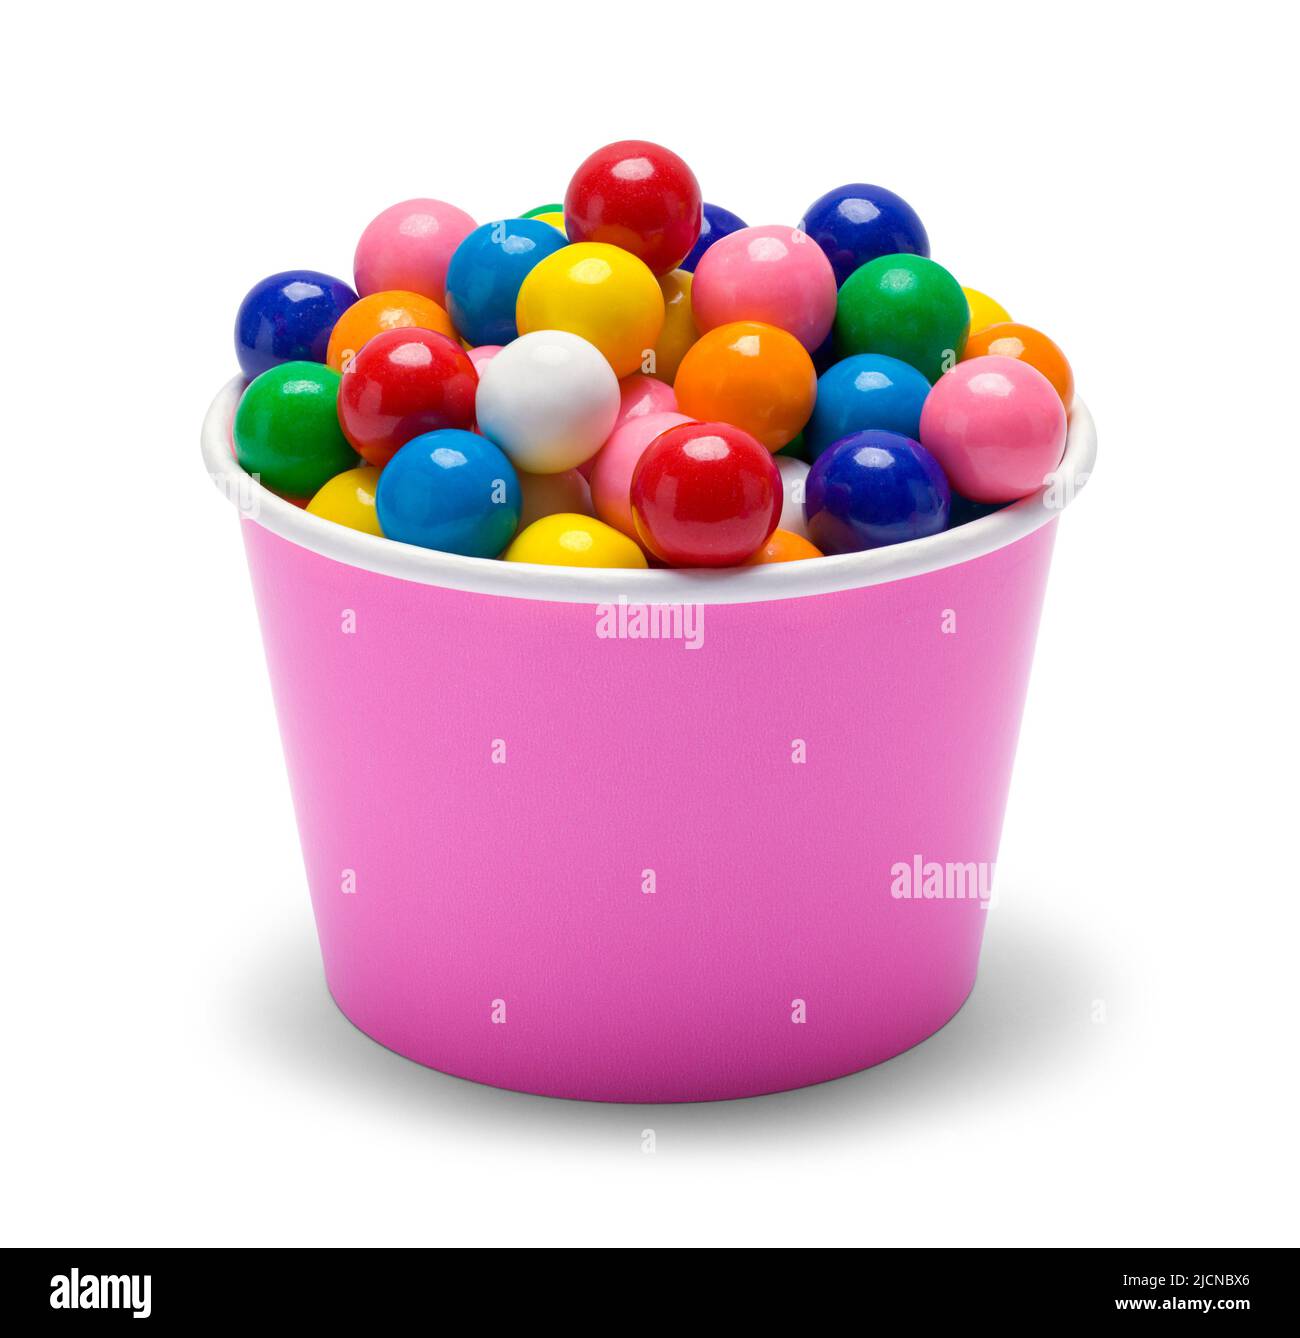 Small Cup of Gum Balls Cut Out on White. Stock Photo